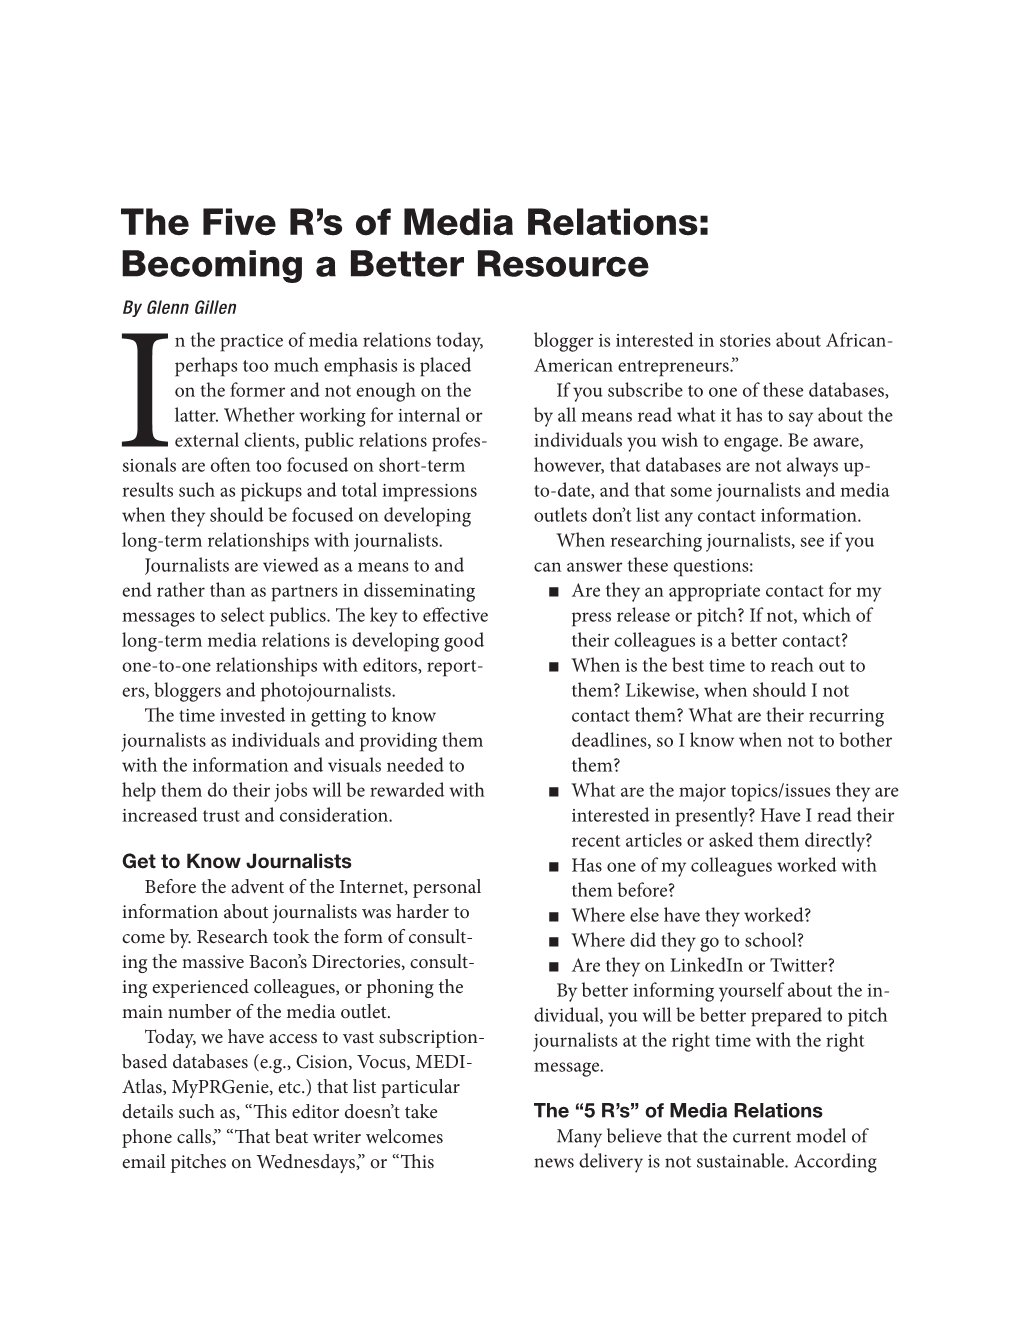 The Five R's of Media Relations: Becoming a Better Resource